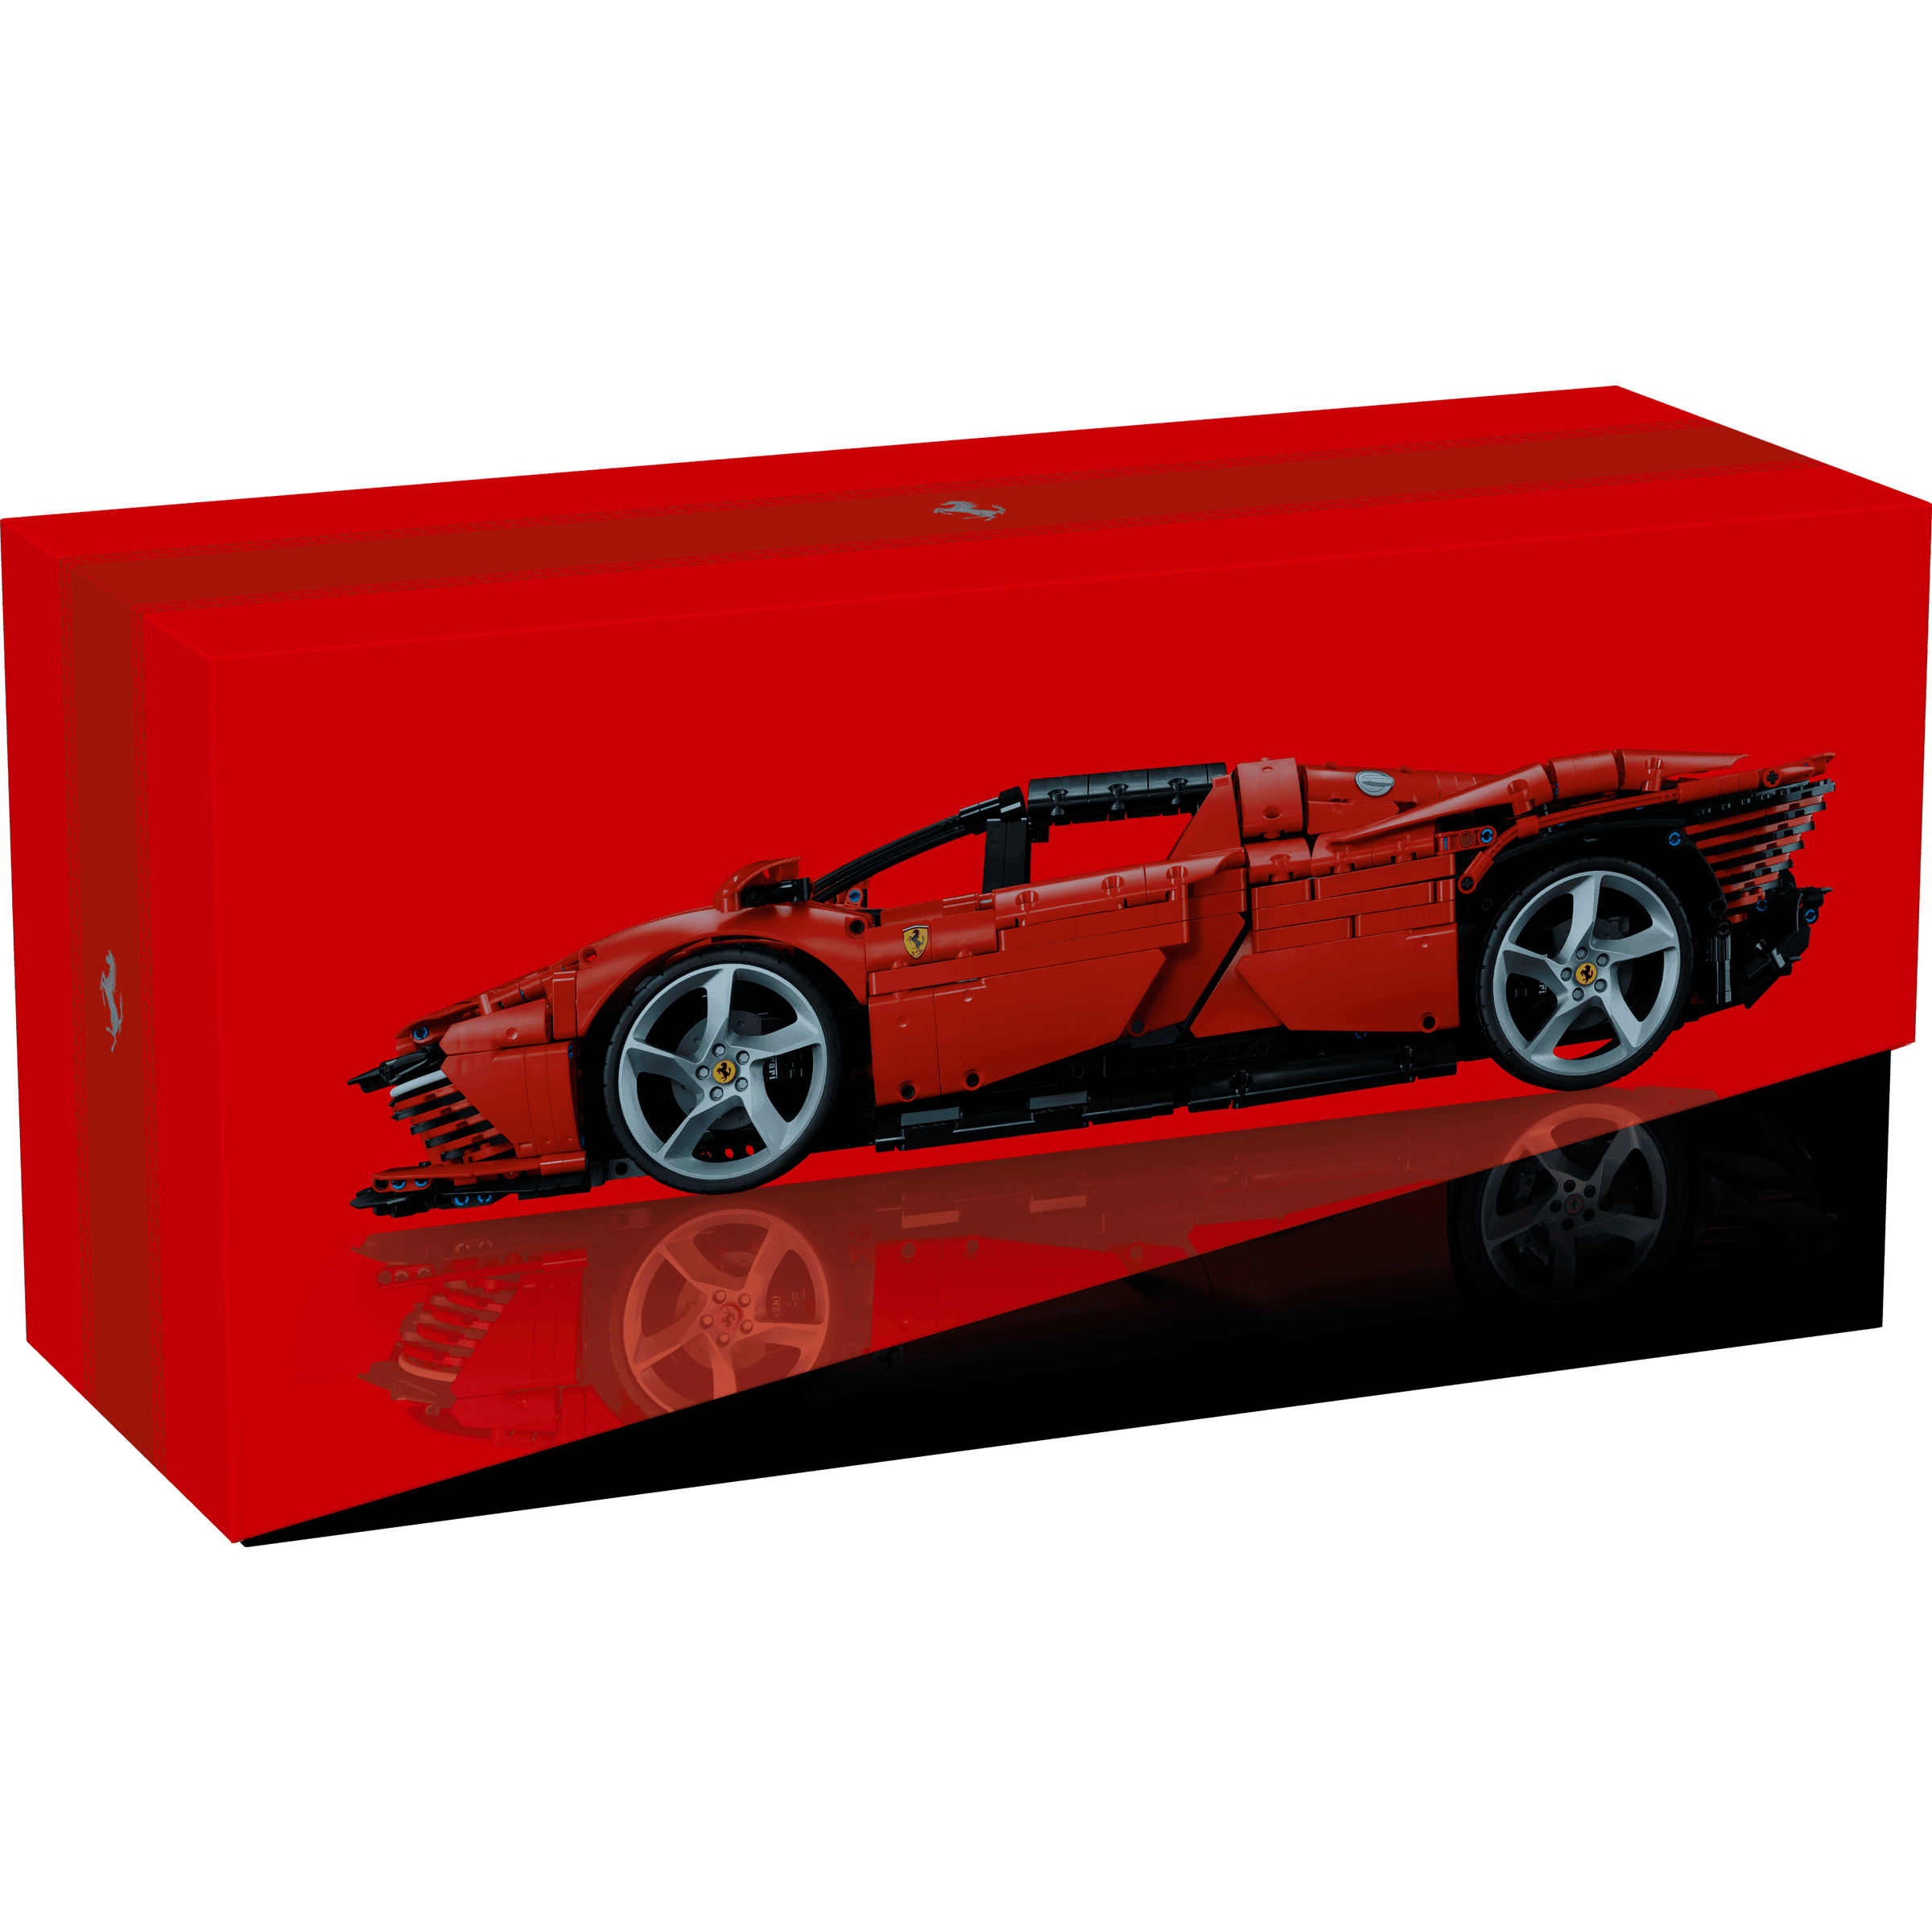 LEGO Technic 42143 Ferrari Daytona SP3 Building Project for Adults, Build 'N Display This Distinctive Model 3778 Pieces - BumbleToys - 8+ Years, 8-13 Years, Boys, Cars, Ferrari, LEGO, OXE, Pre-Order, Speed Champions